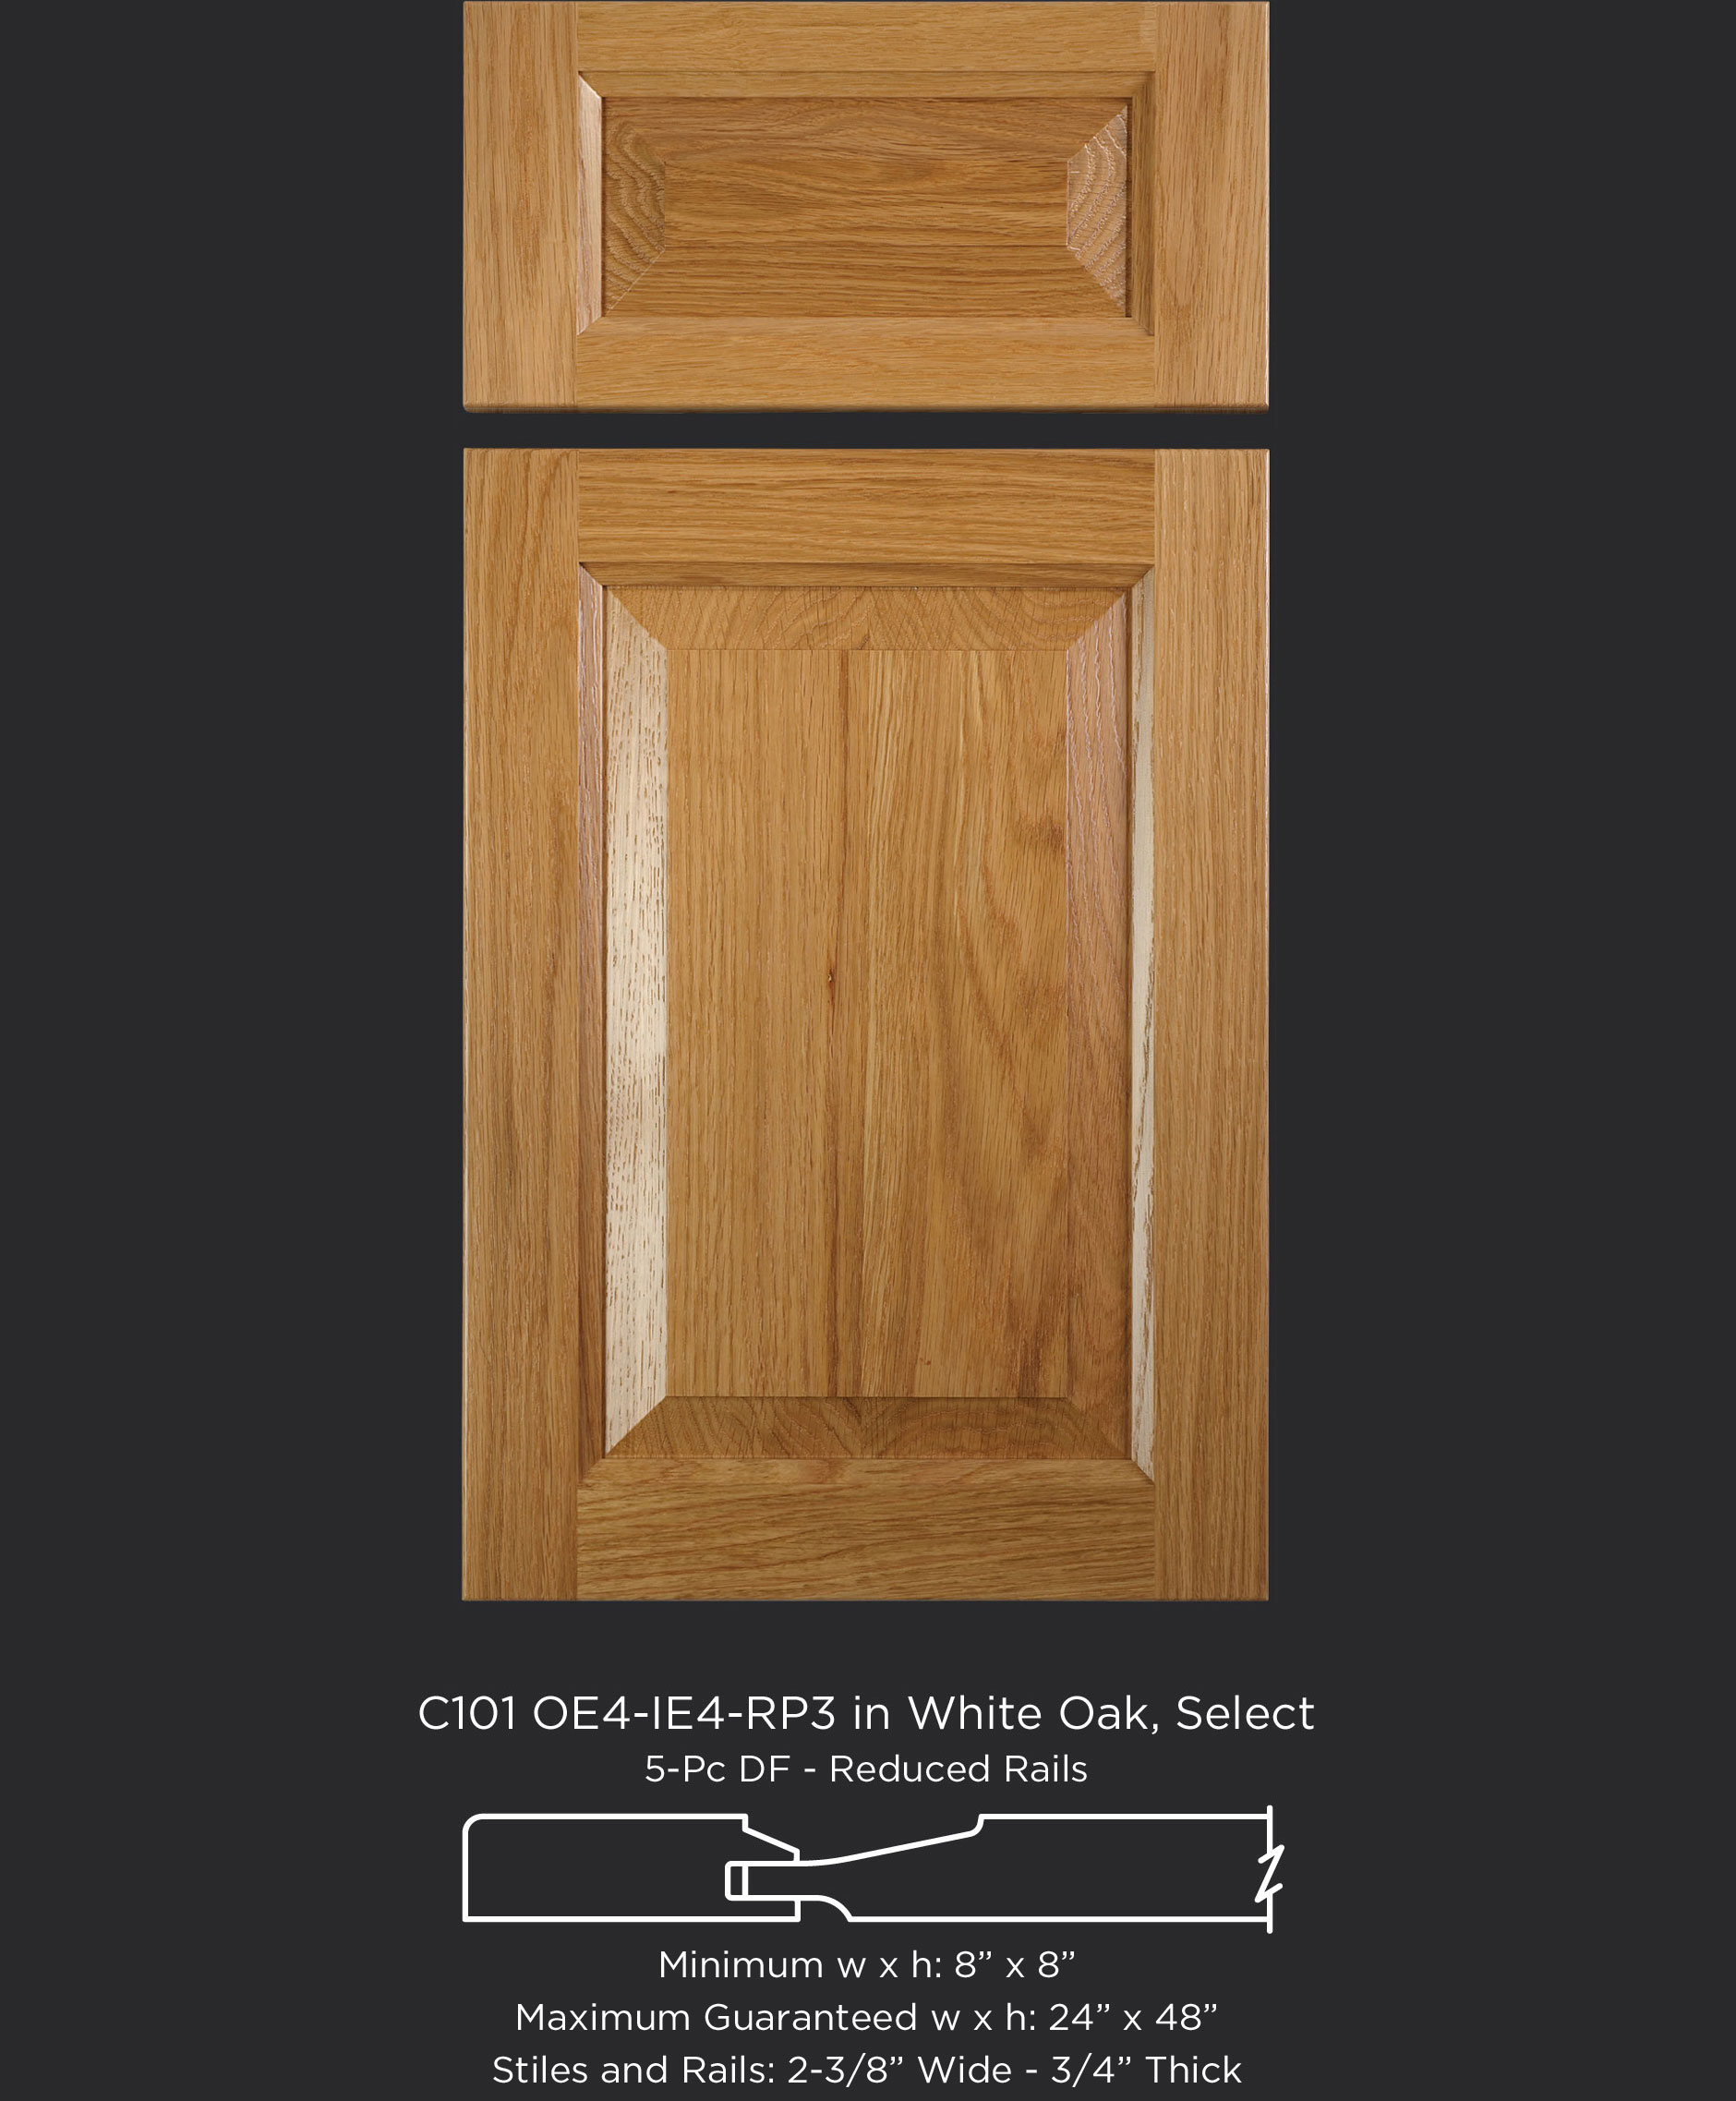 Cope and Stick Cabinet Door C101 OE4-IE4-RP3 White Oak, Select and 5-piece drawer front with reduced rails